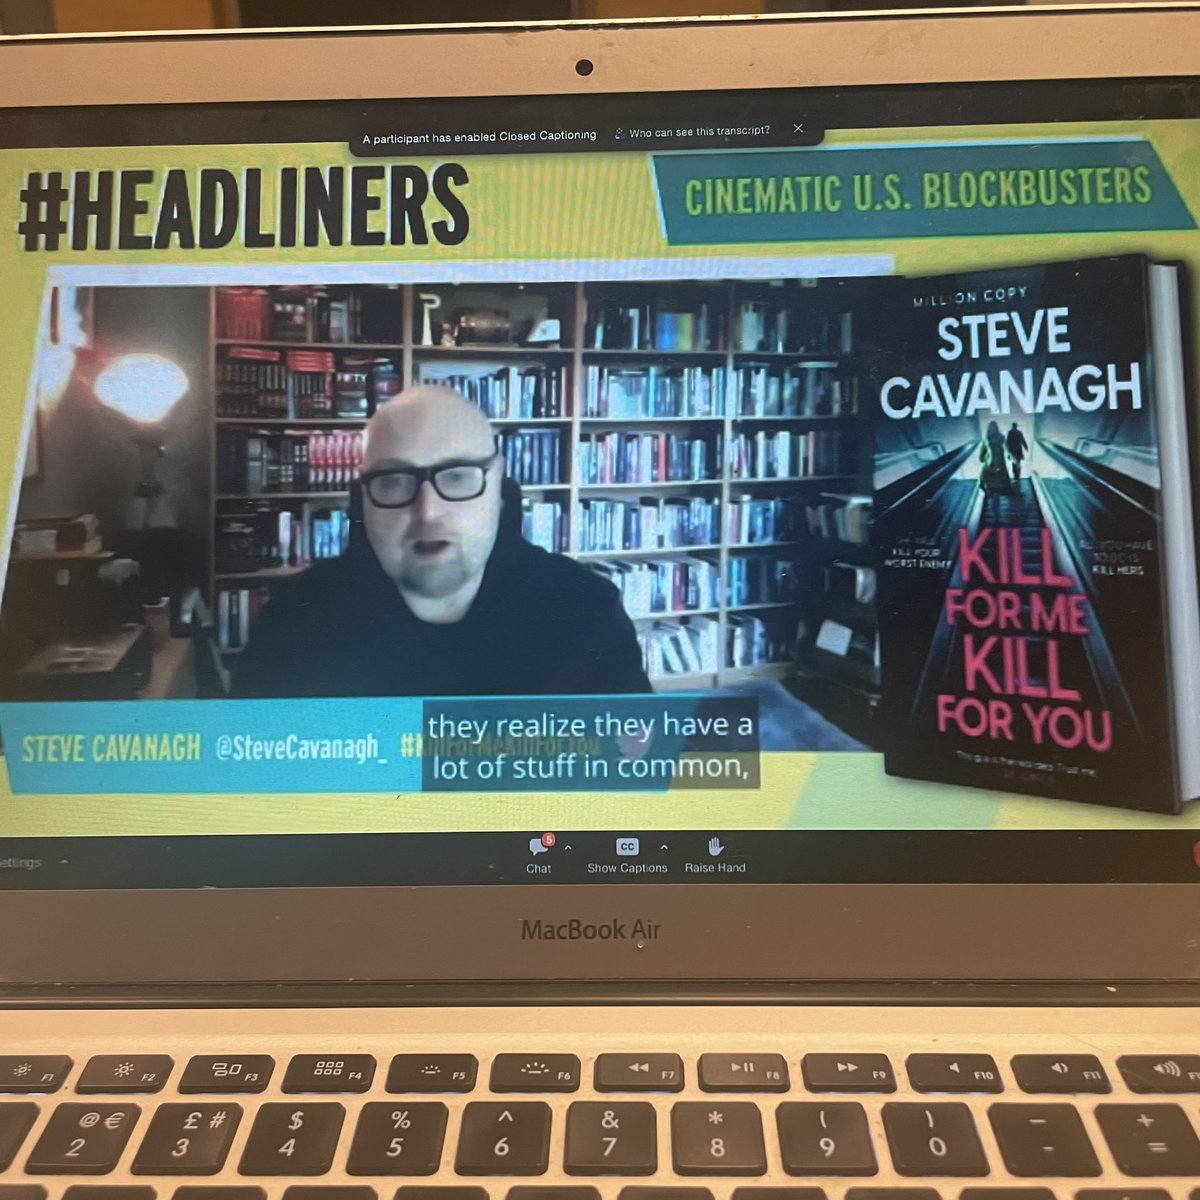 A new @SteveCavanagh_ is always a cause for celebration - can’t wait to read #KillForMeKillForYou! @headlinepg #Headliners